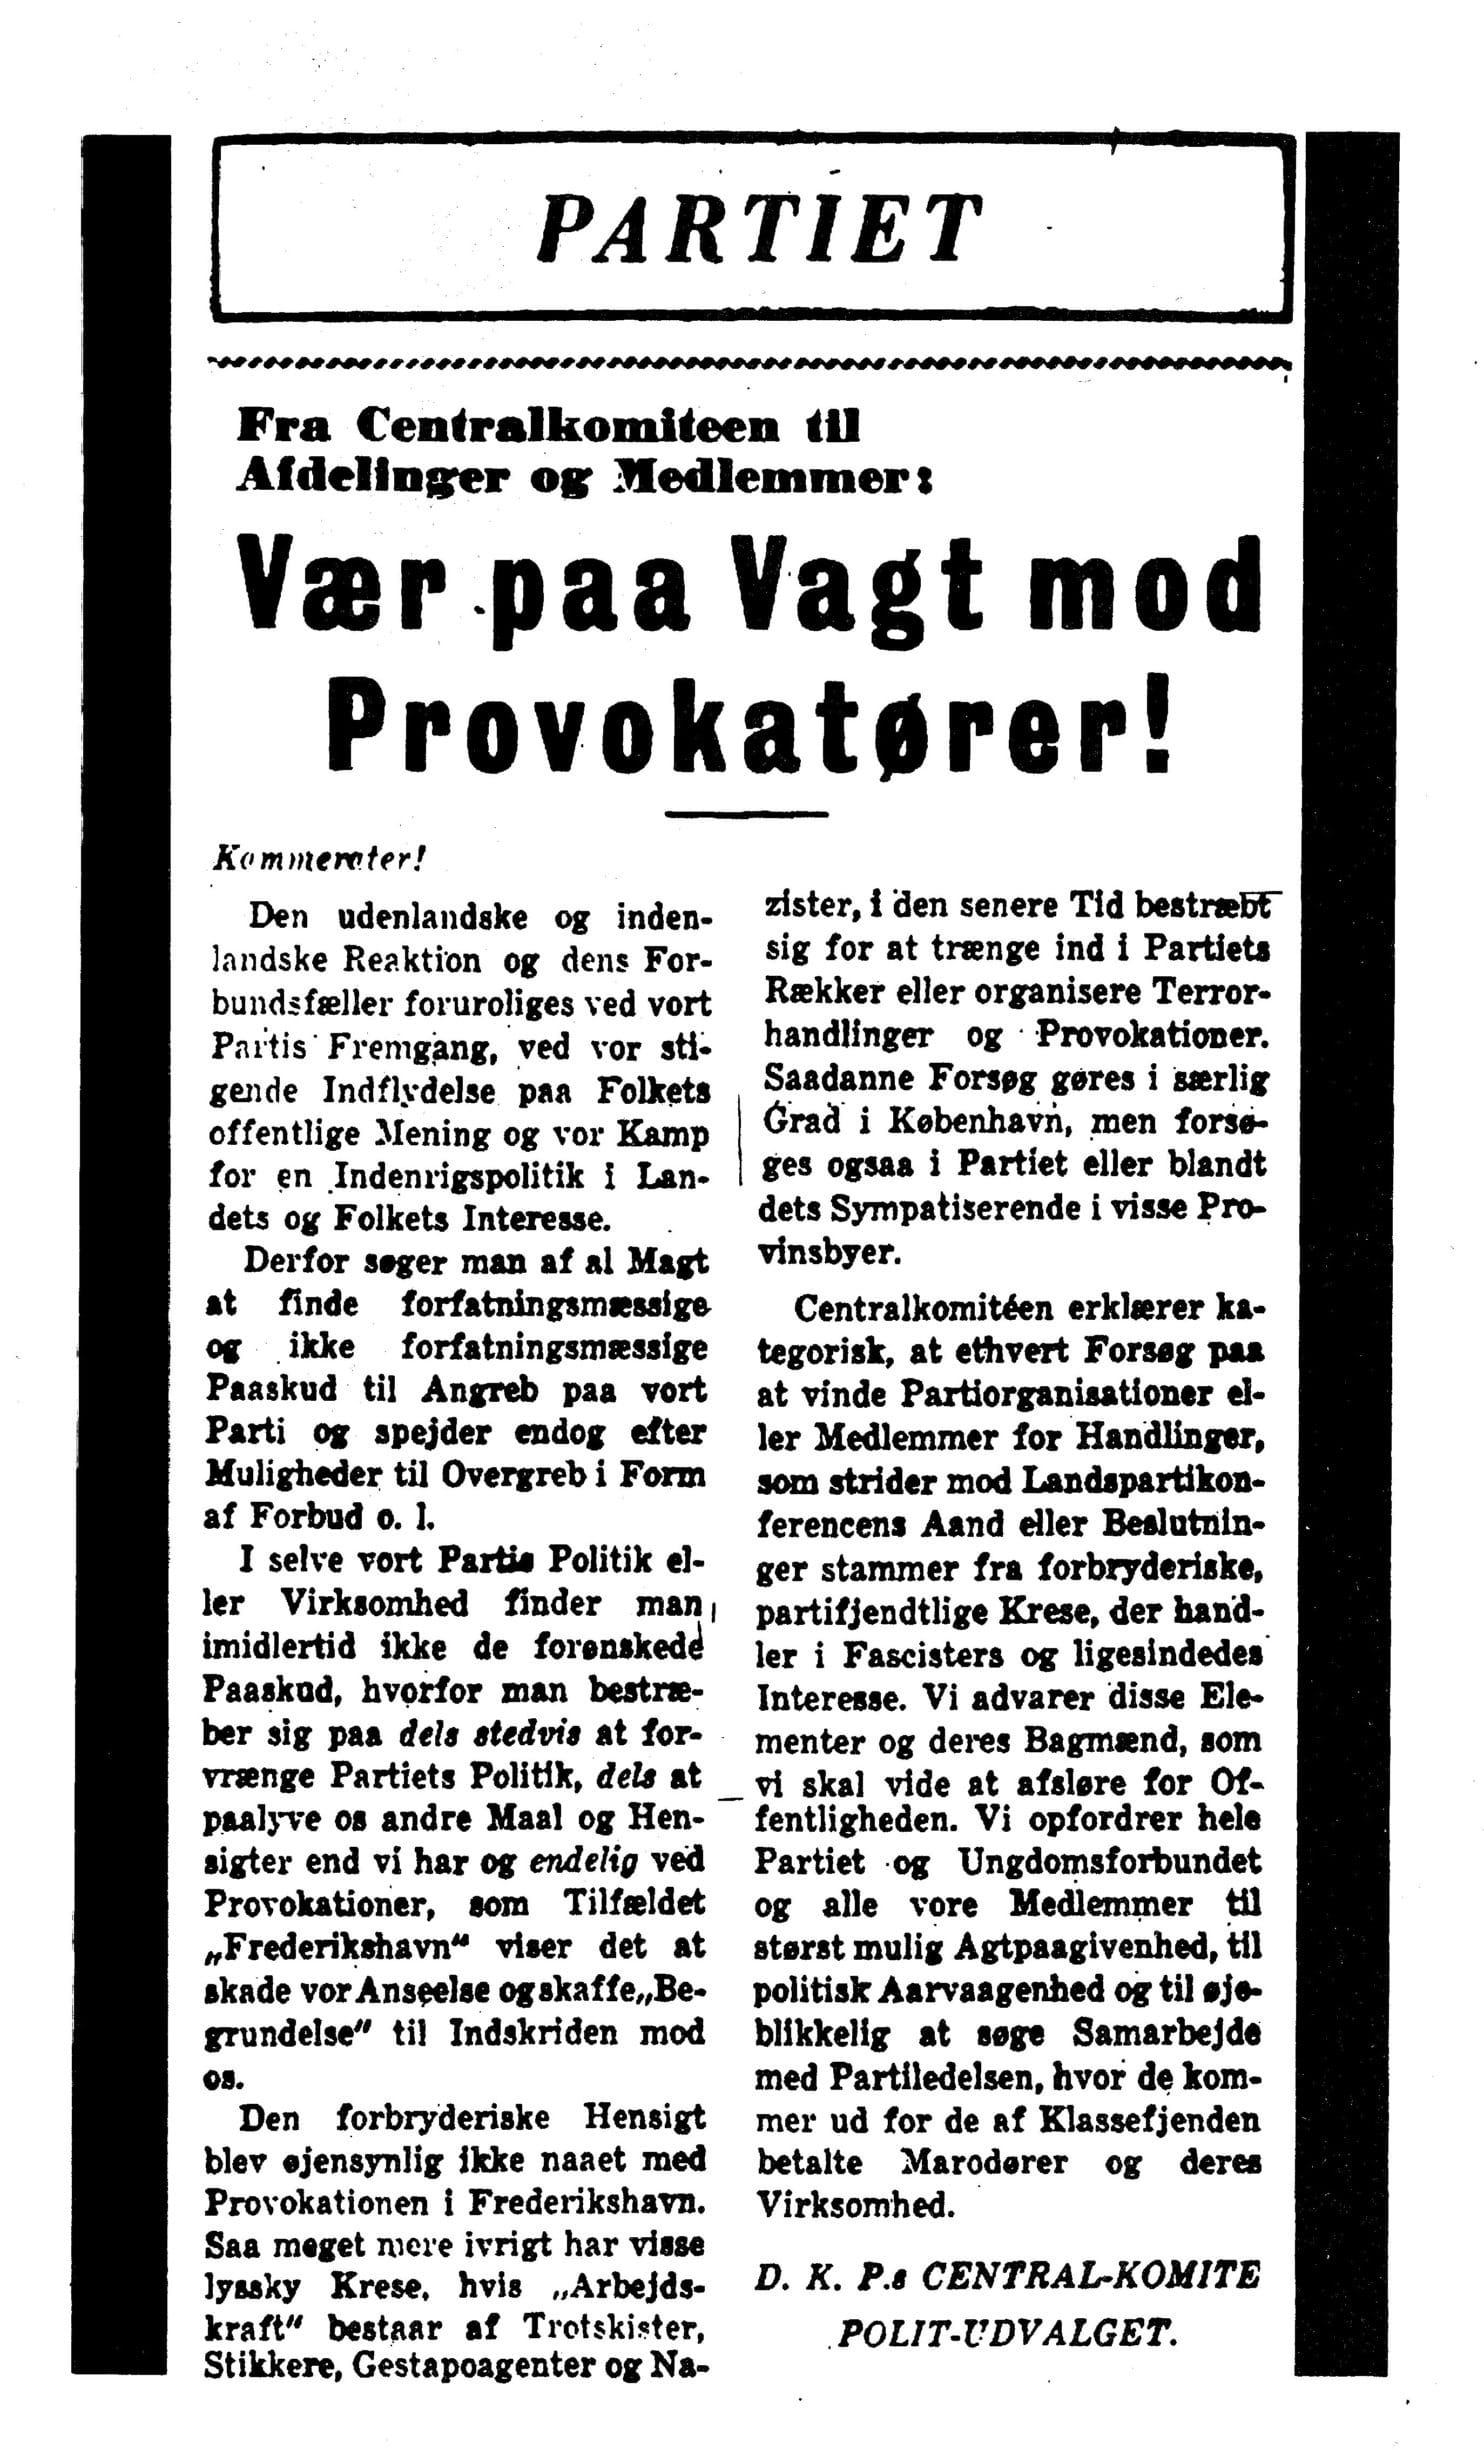 The DKP reacts to a Wolweber League bombing in 1938: From the Central Committee to the chapters and members: Beware of Provocateurs